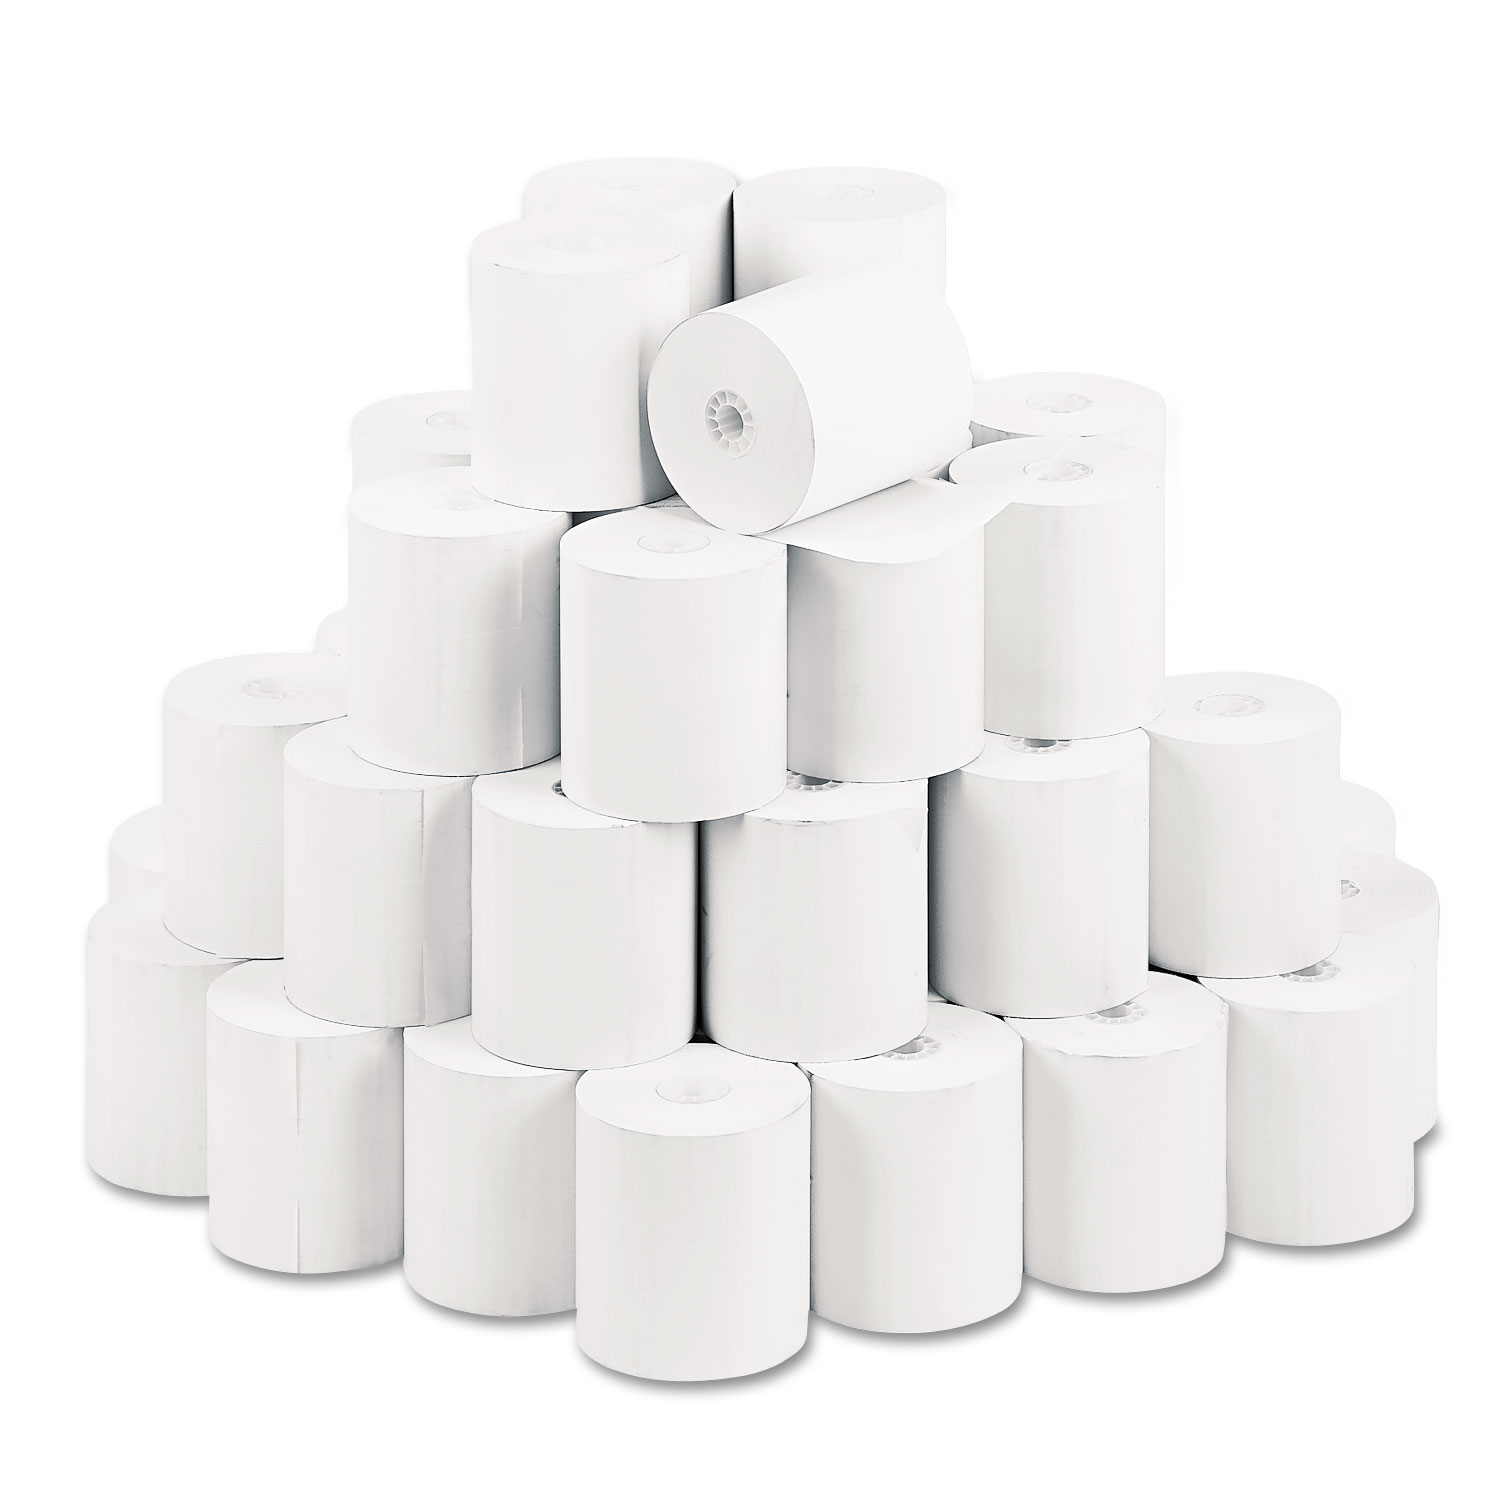  Iconex 5214 Direct Thermal Printing Thermal Paper Rolls, 3.13 x 230 ft, White, 50/Carton (ICX90781278) 